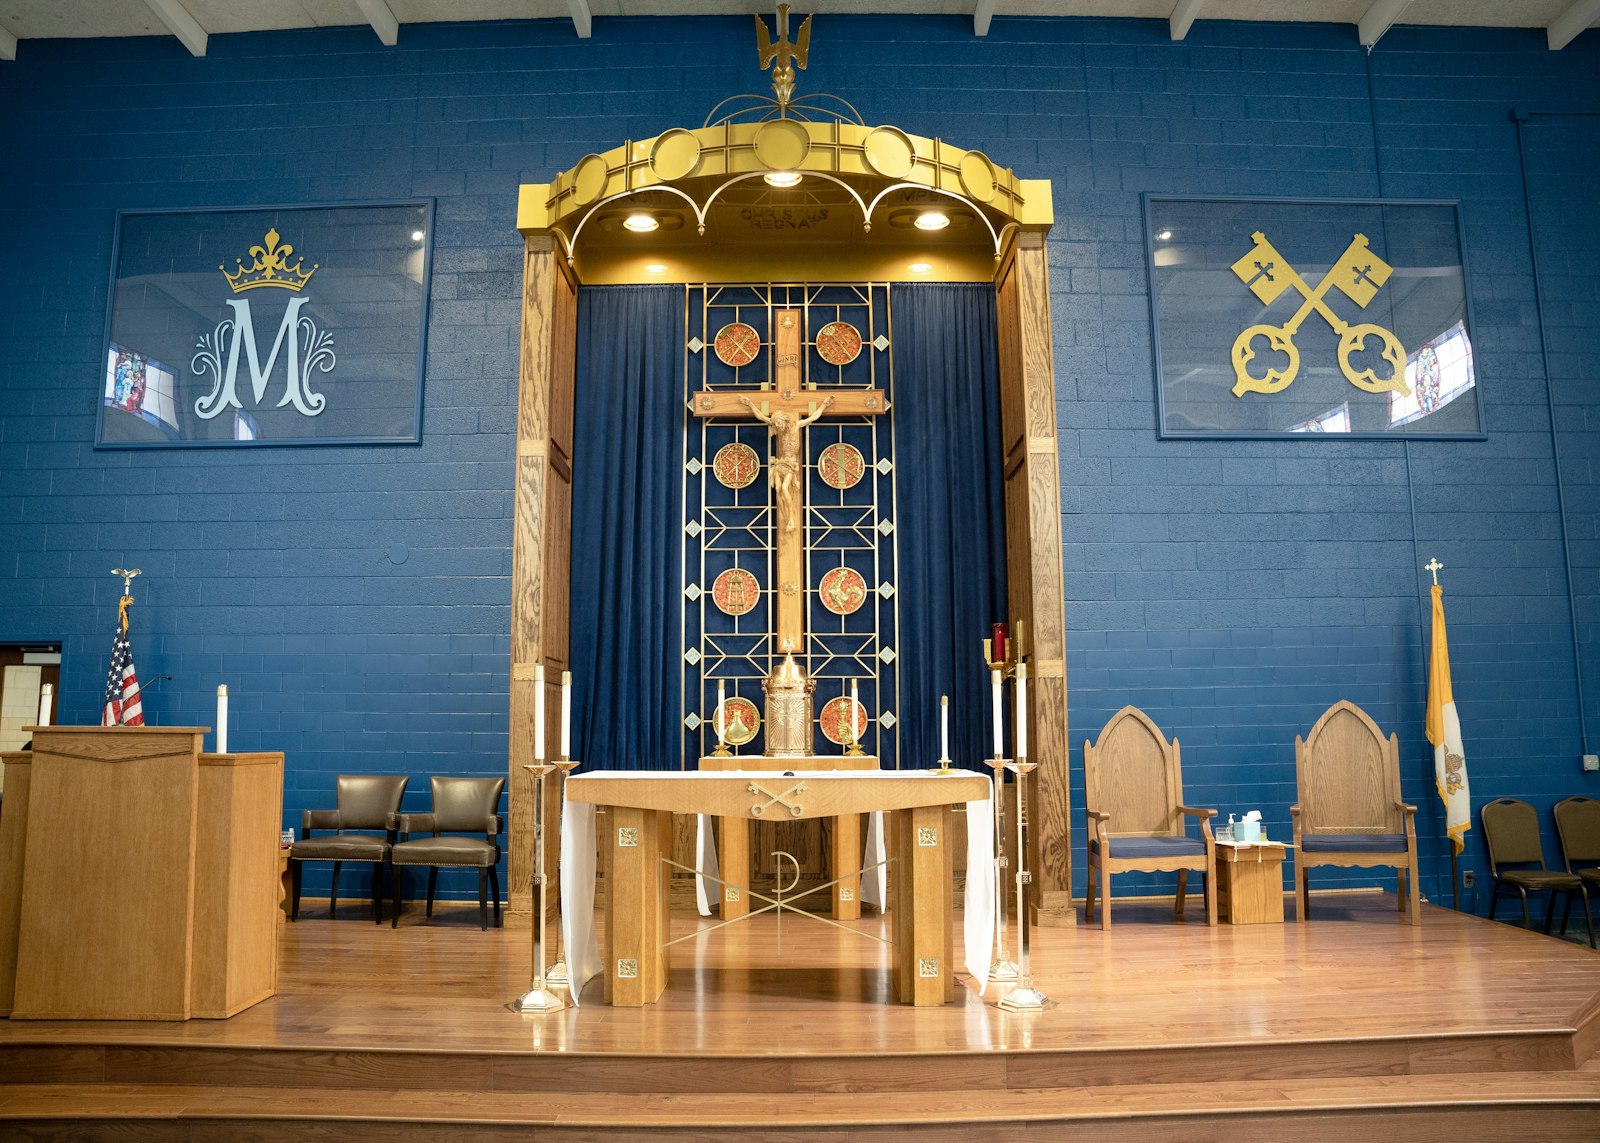 Elements of the chapel were rescued from area churches or chapels, including the altar, which was formerly the altar for St. Peter Parish. The parish dedicated a new marble altar in 2022.